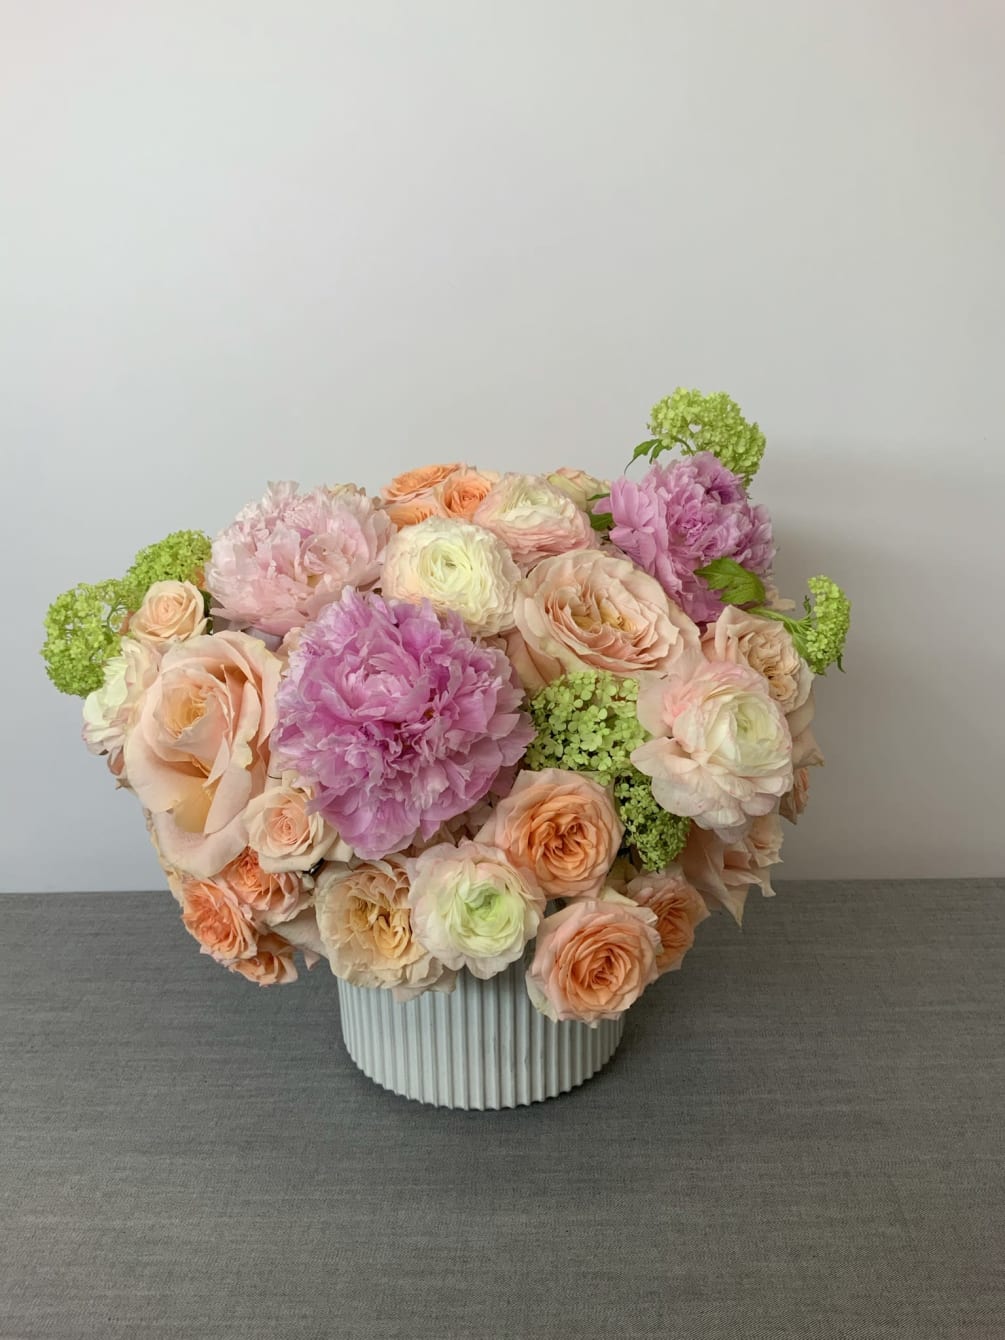 Mixture of roses, peonies, and other perfect flower choices.